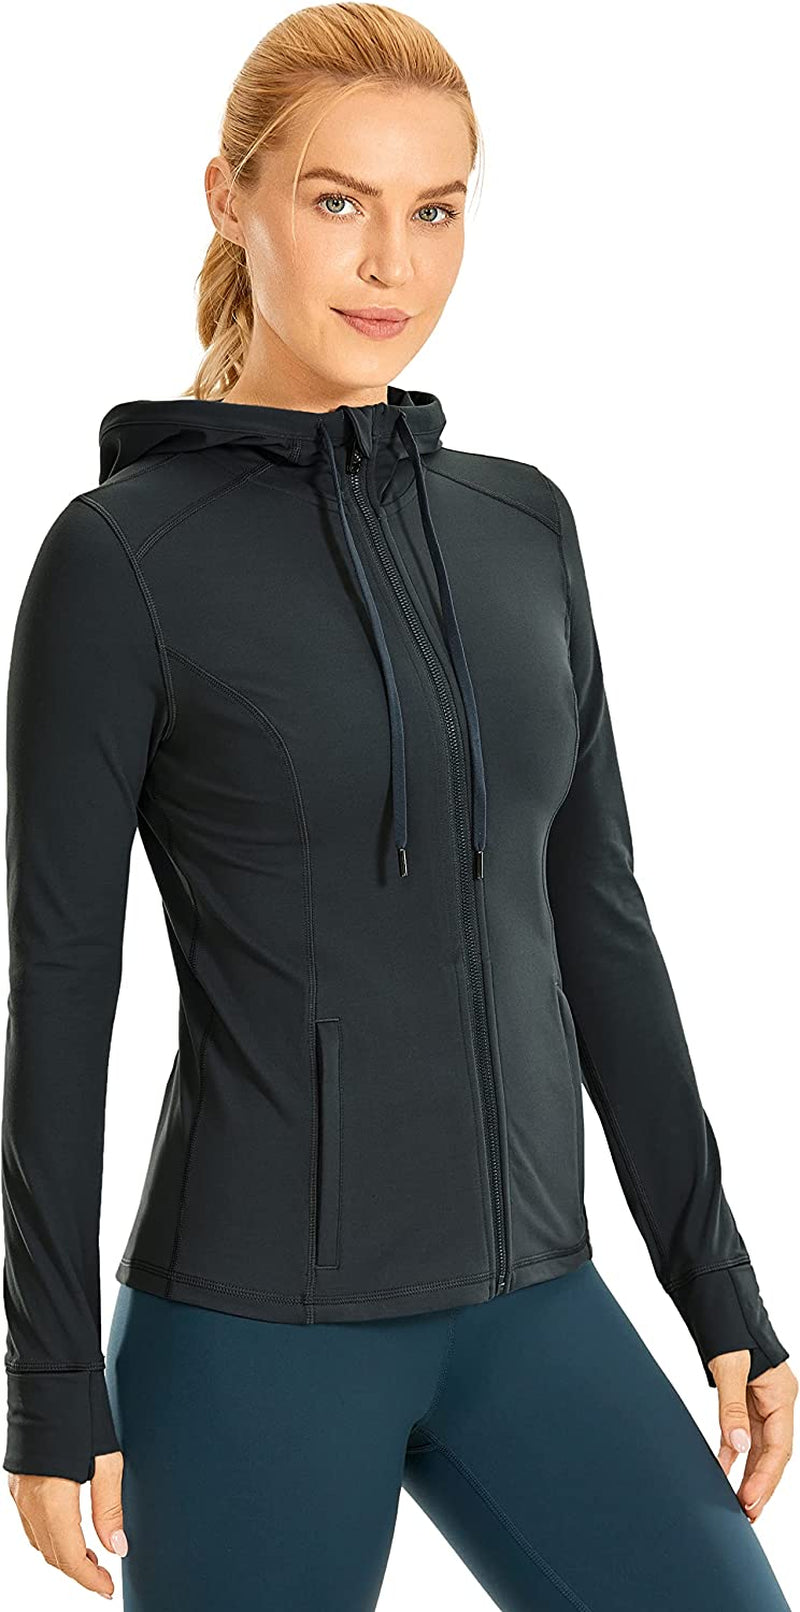 "Women's Zip-Up Hoodie Jacket - A Comfortable and Fashionable Choice for Workout Sessions, Complete with Convenient Zip Pockets"